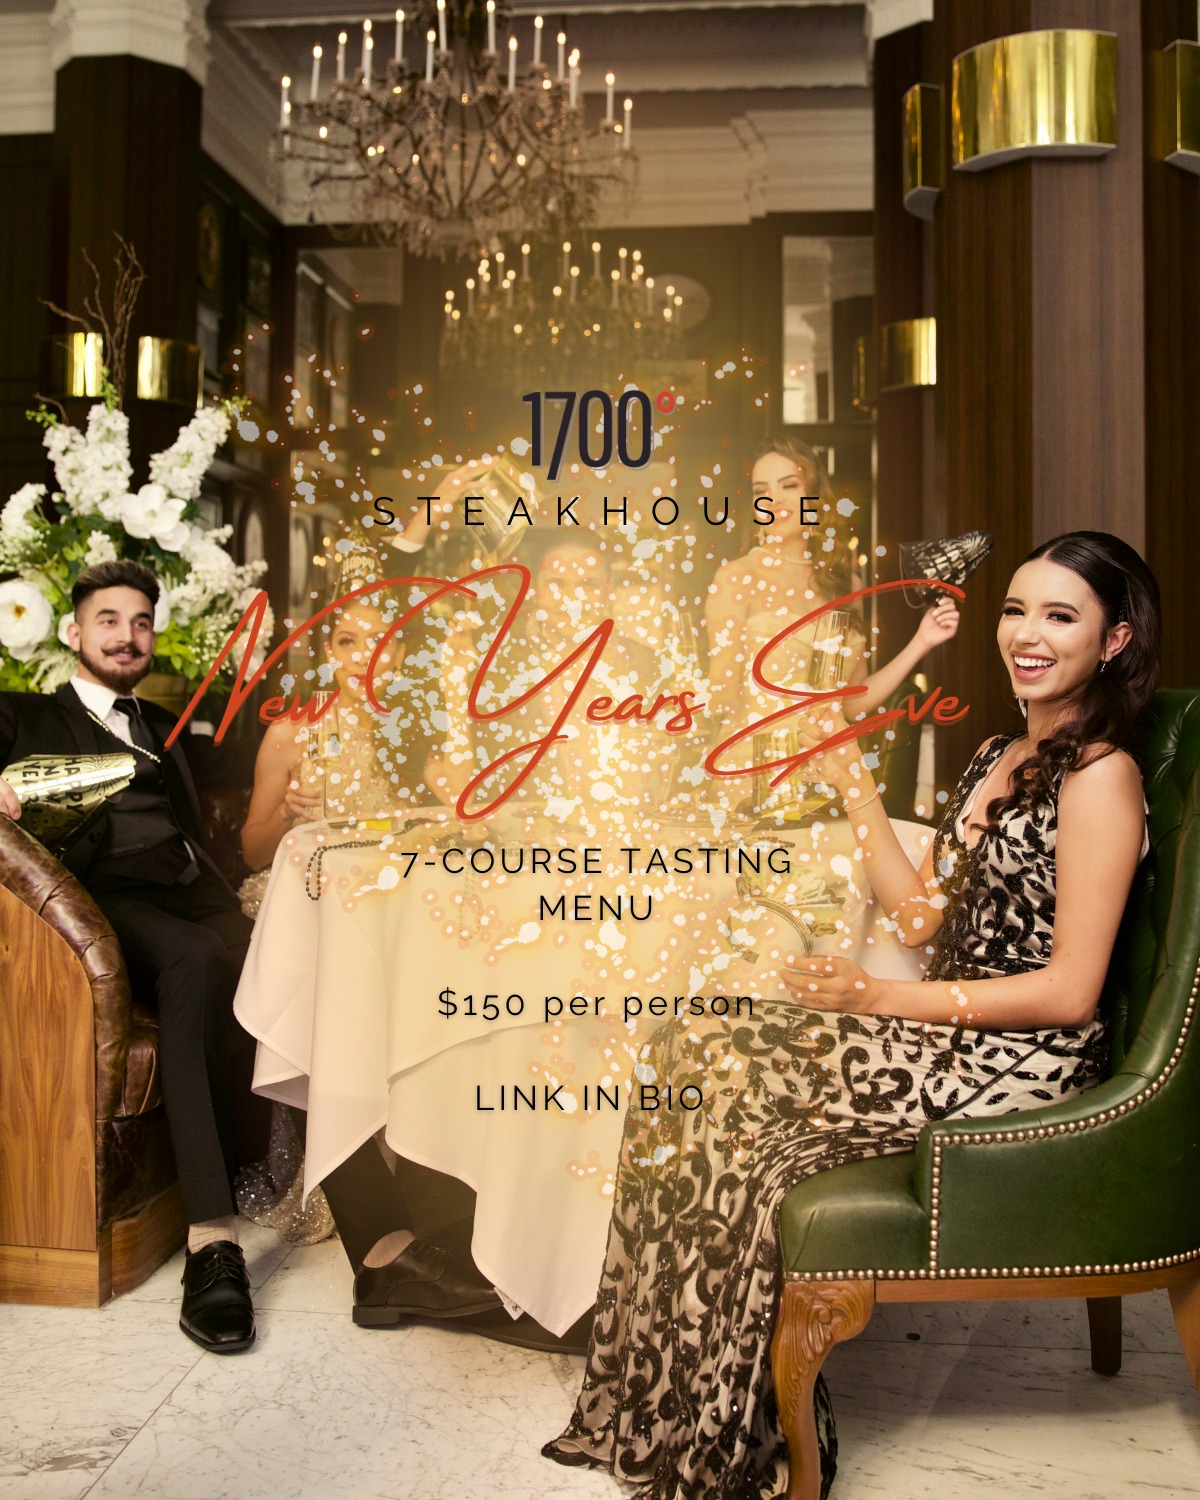 1700 Steakhouse New Year's Eve DMD Downtown El Paso